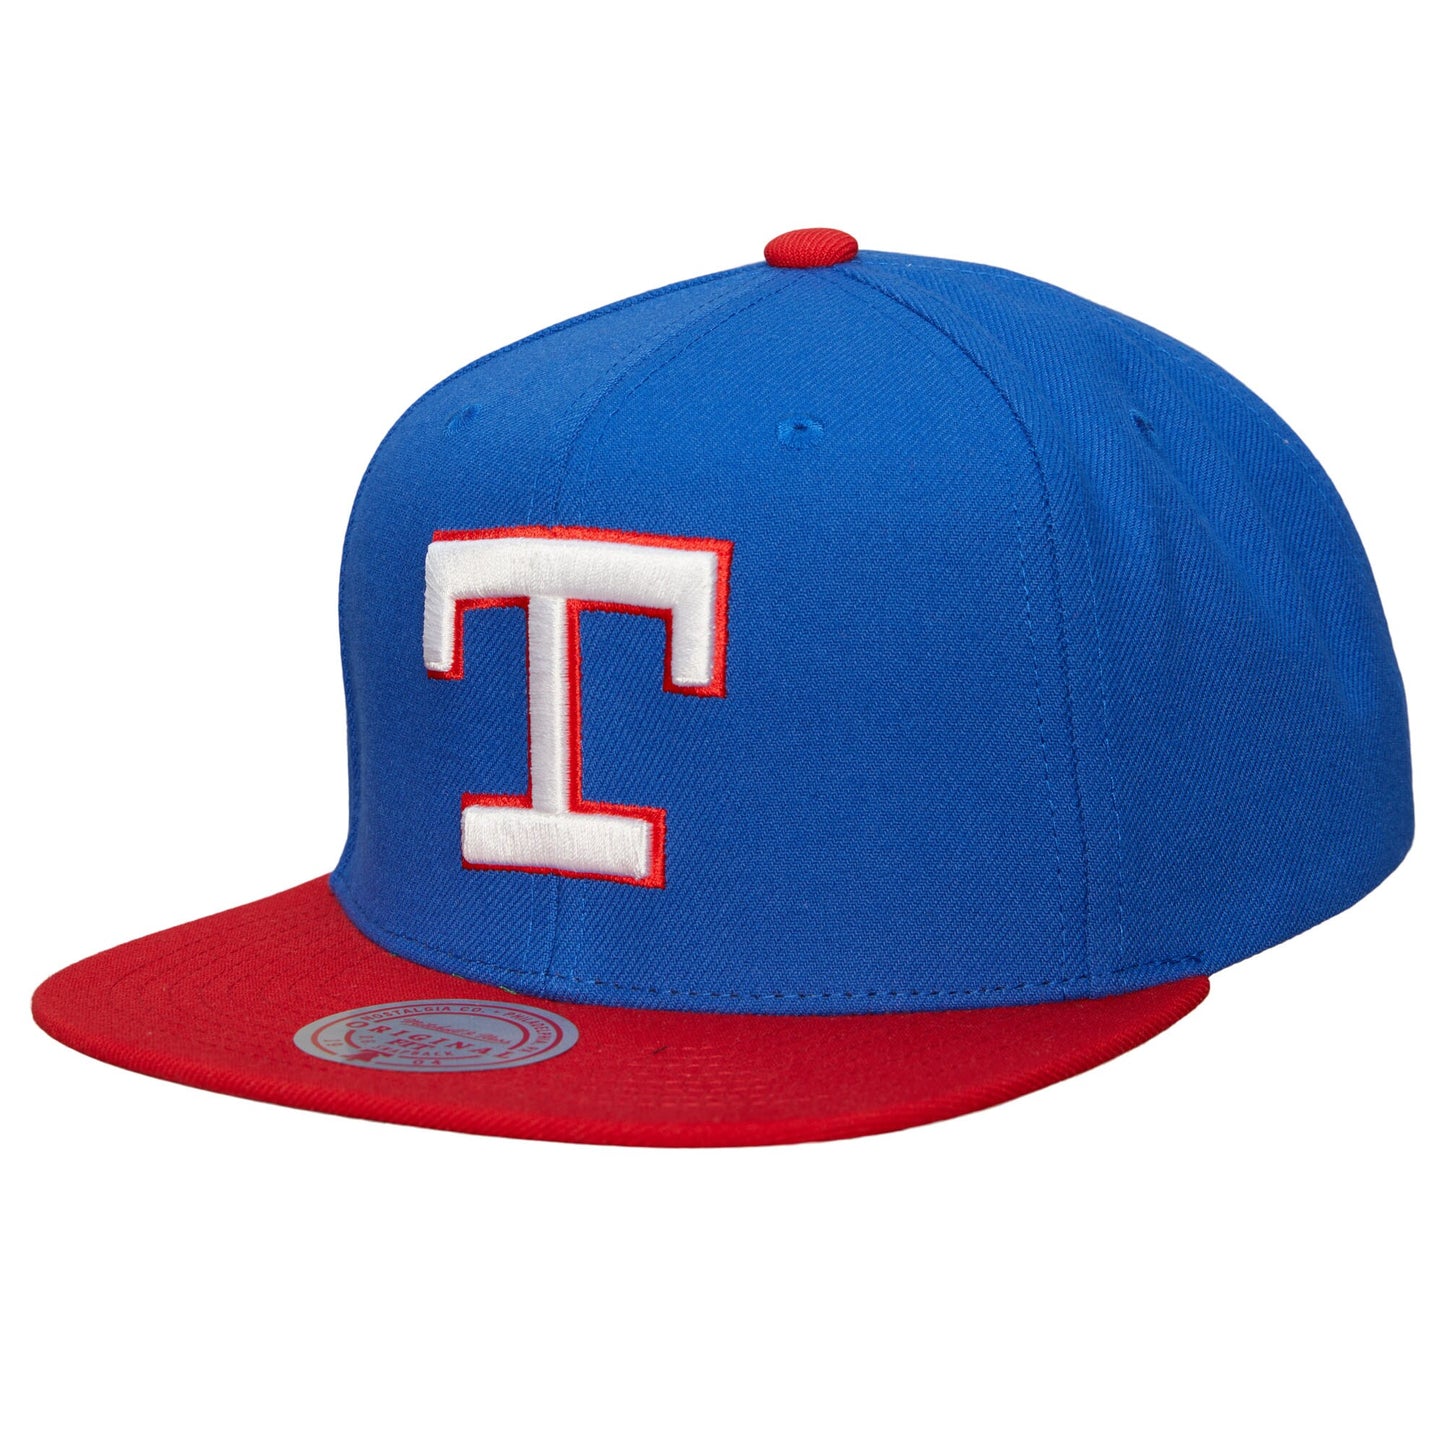 Texas Rangers Mitchell & Ness Cooperstown Collection Evergreen Snapback Hat - Royal